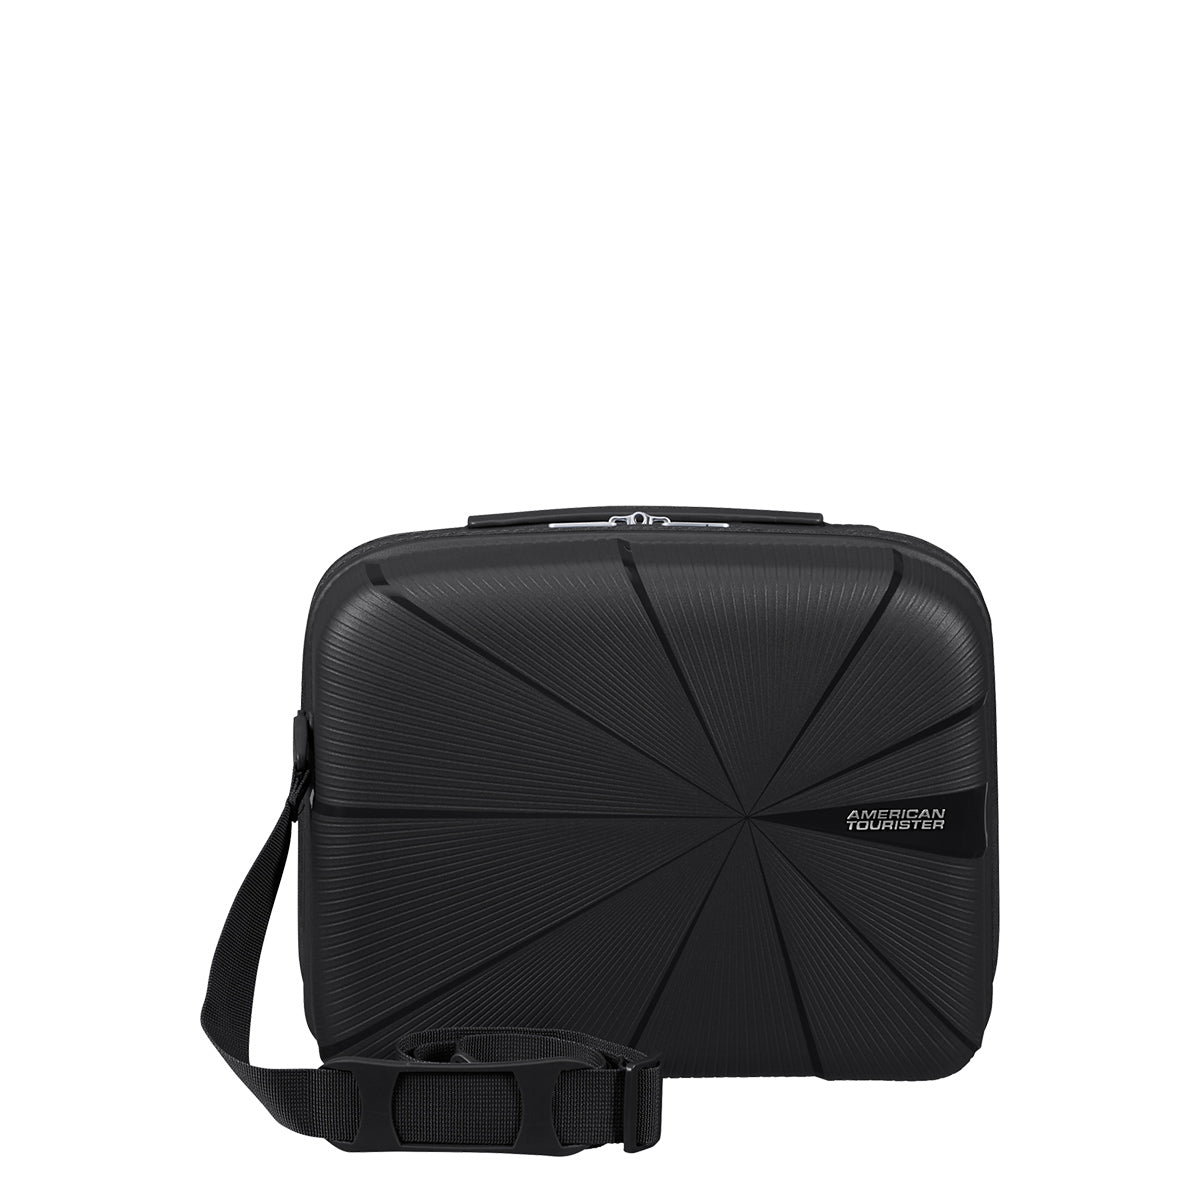 American Tourister - Beauty Case Starvibe - MD5001 - BLACK